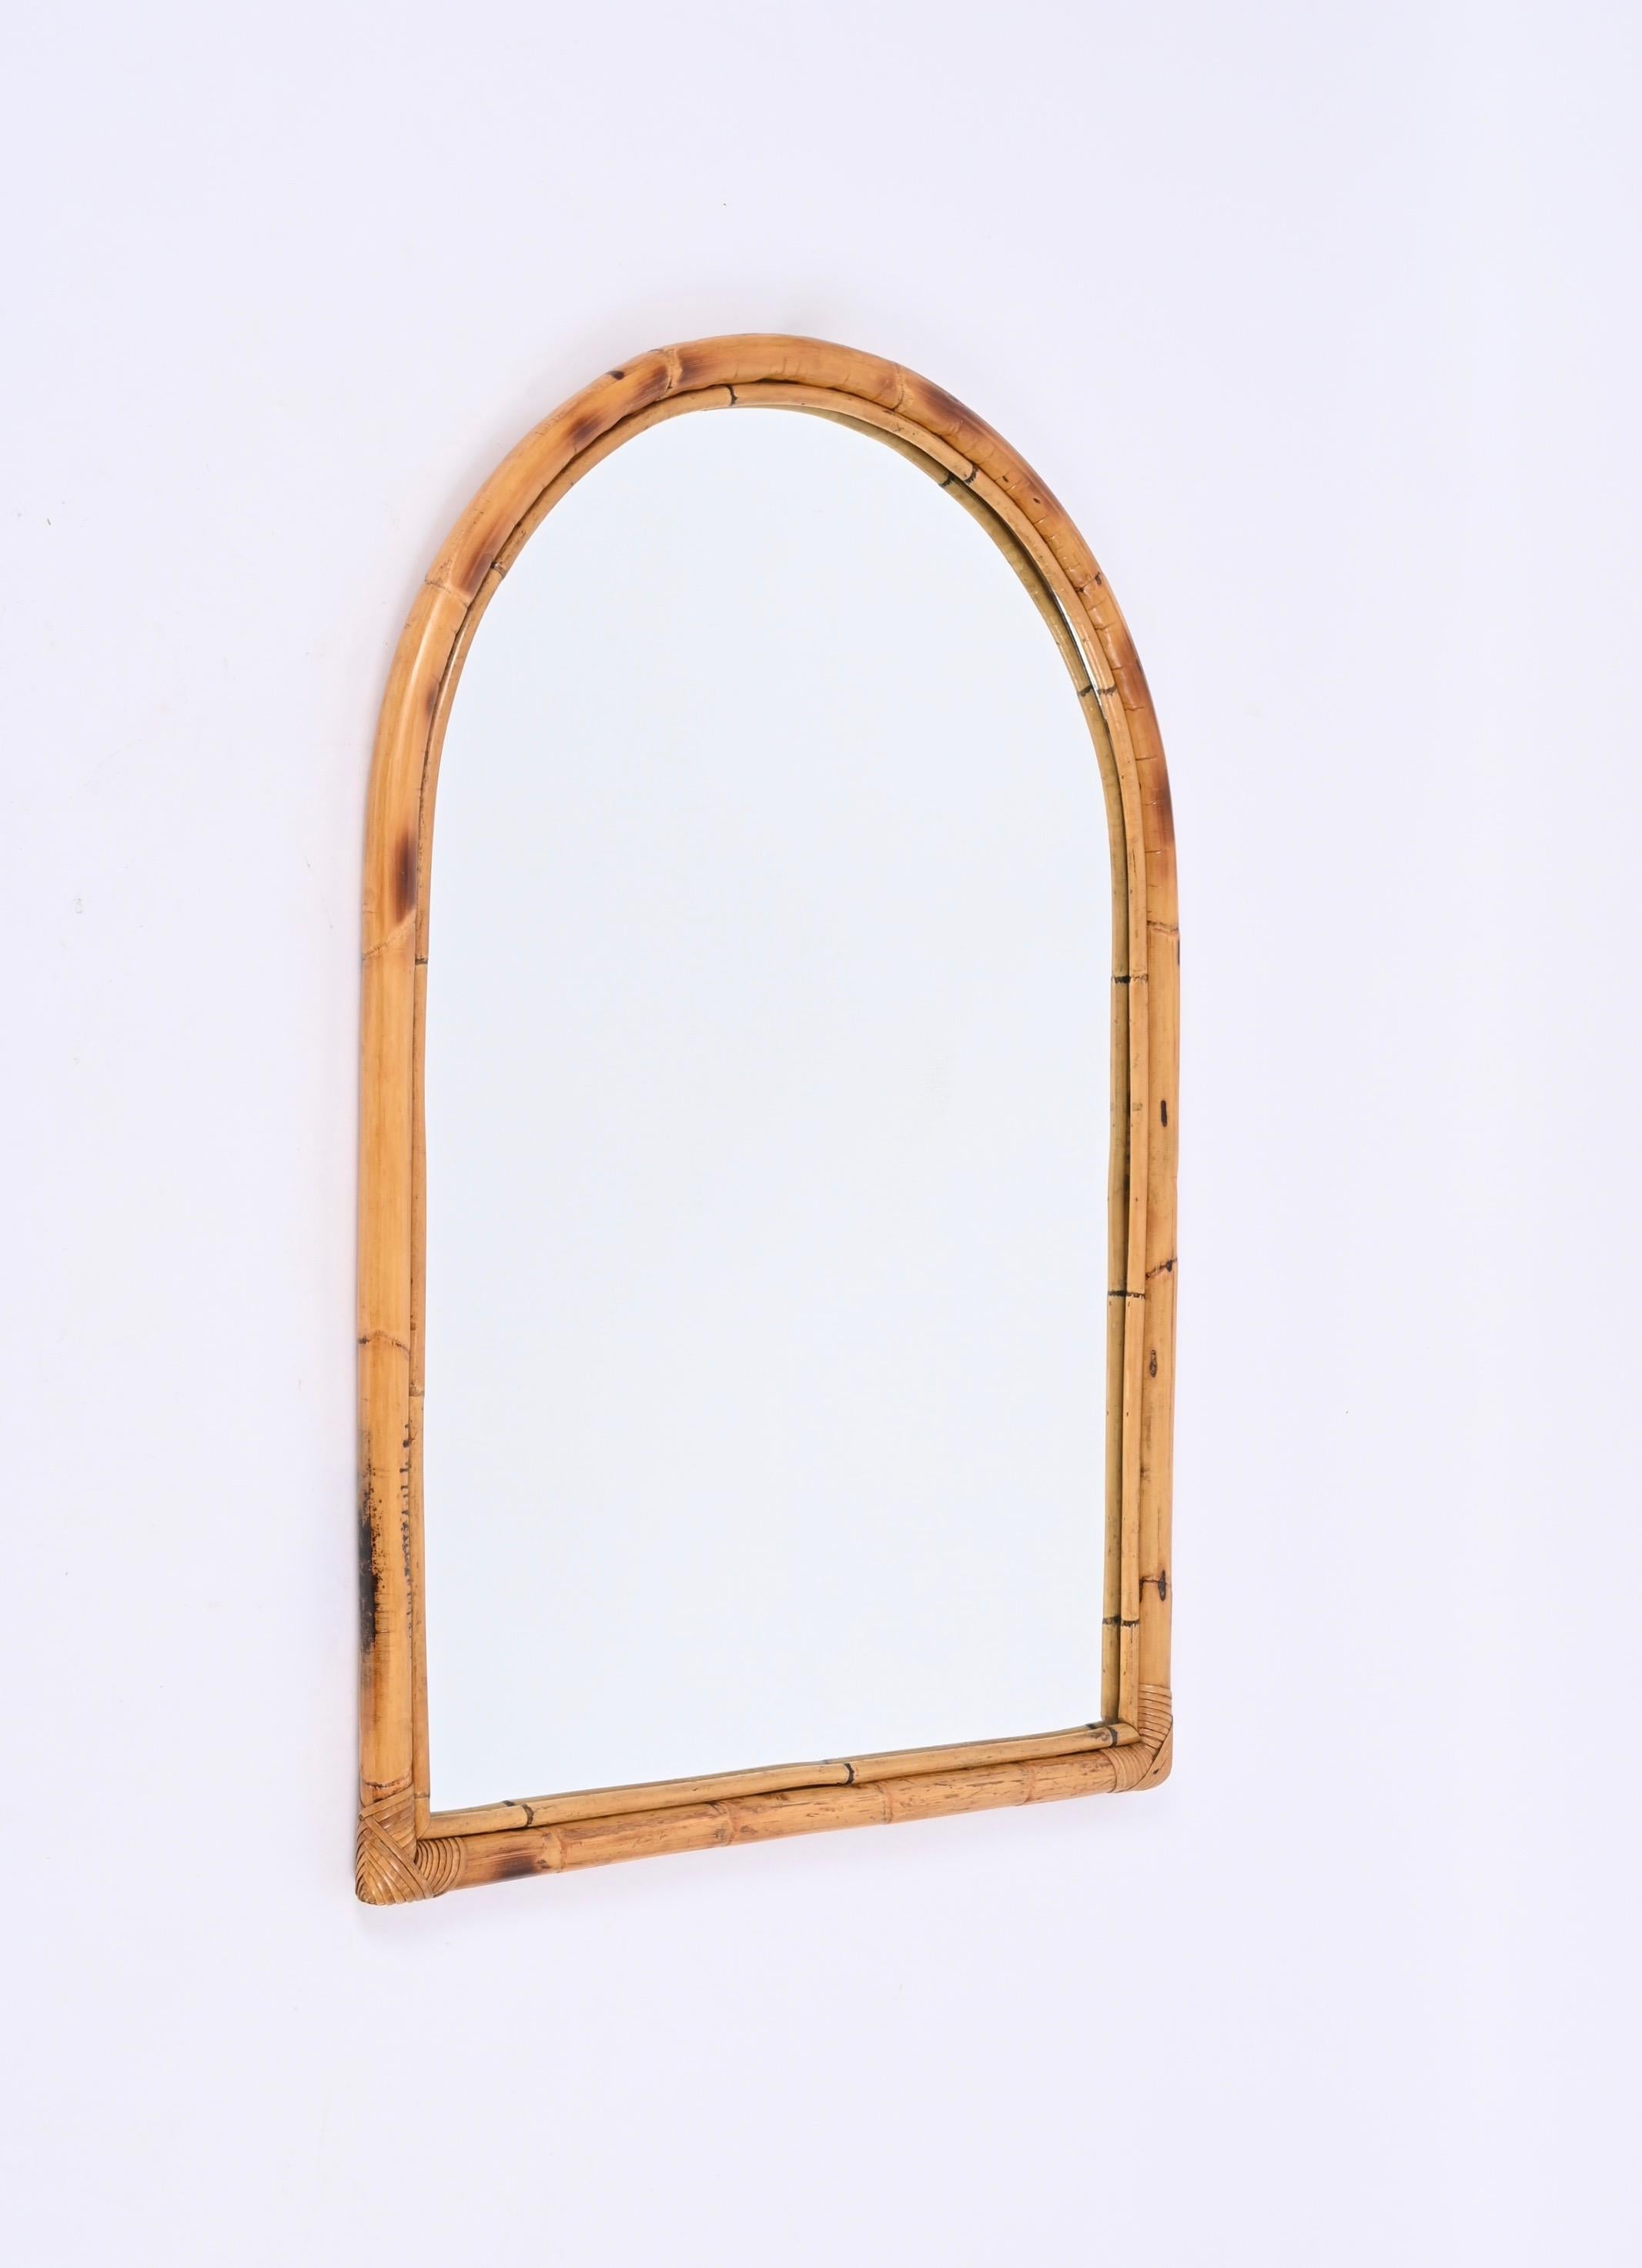 Midcentury Italian Arch Mirror with Double Bamboo and Rattan Frame, Italy, 1970s For Sale 2